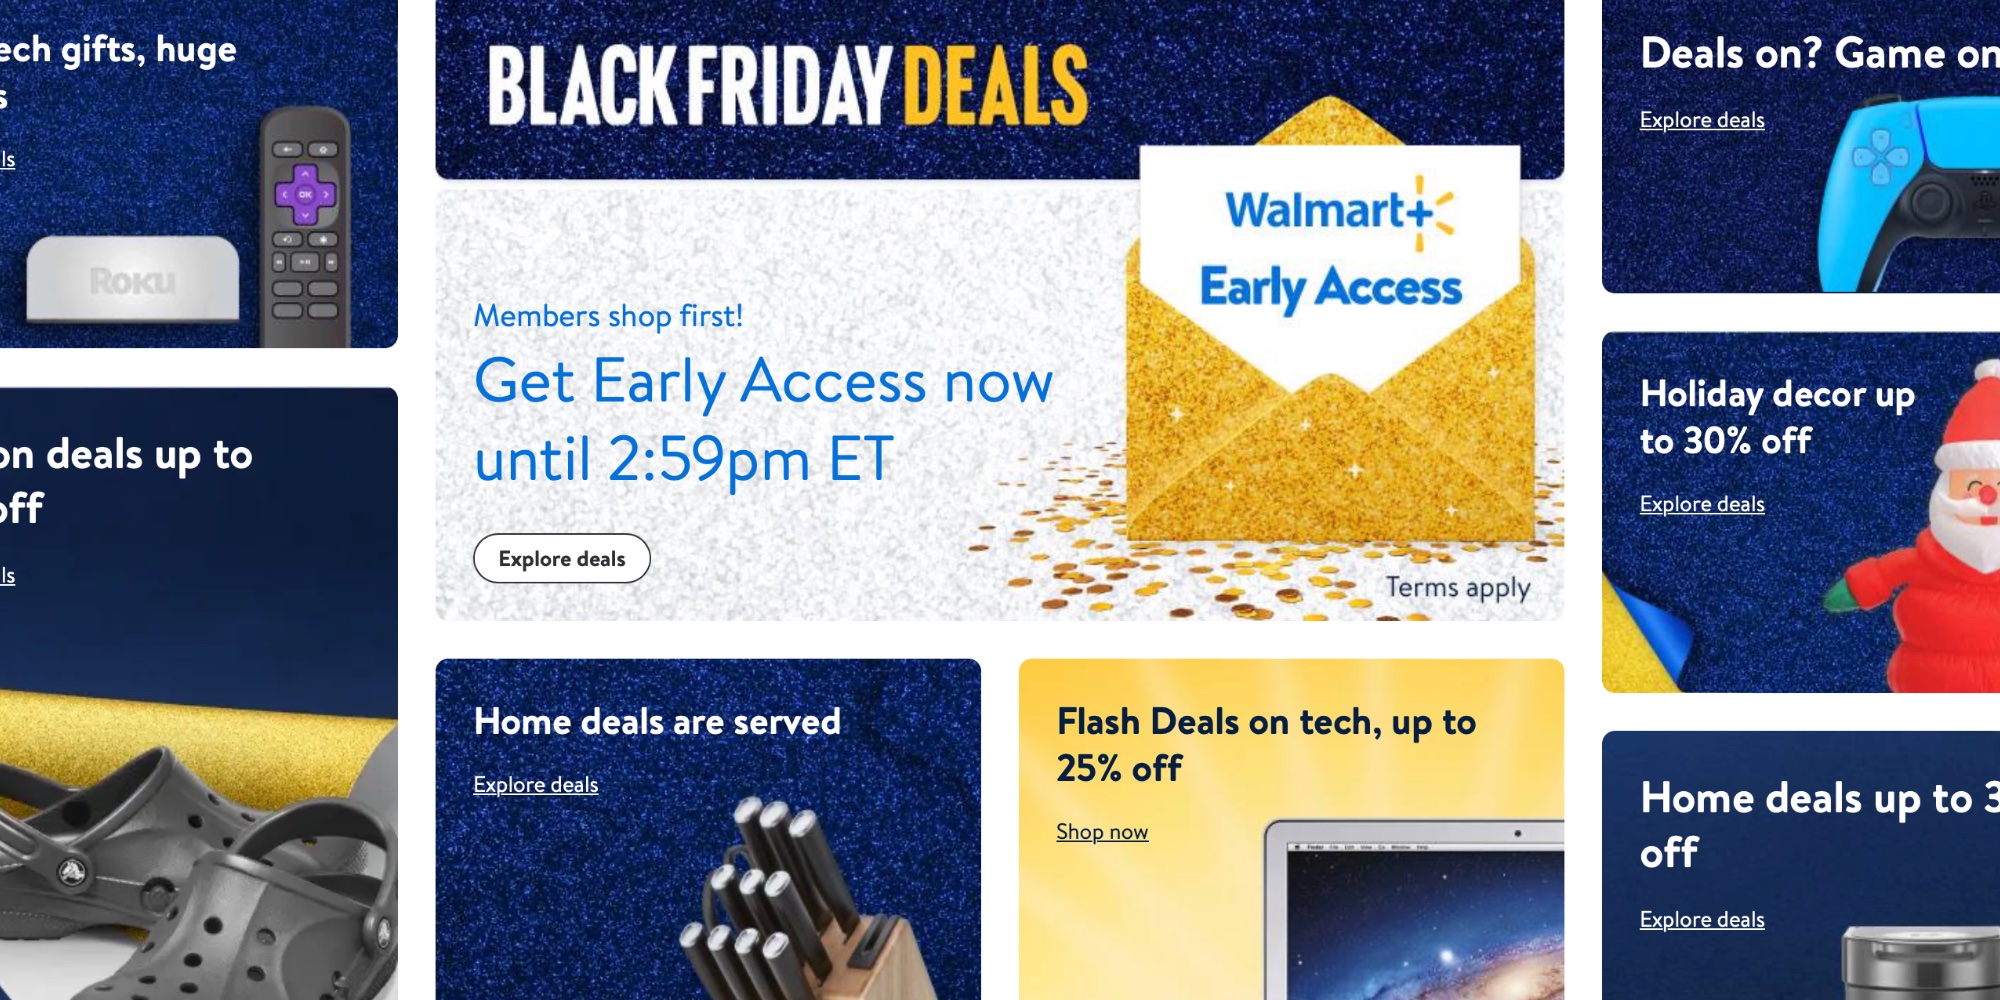 Walmart+ Is On Sale Before Black Friday, Get 50% Off Its Regular Price - IGN